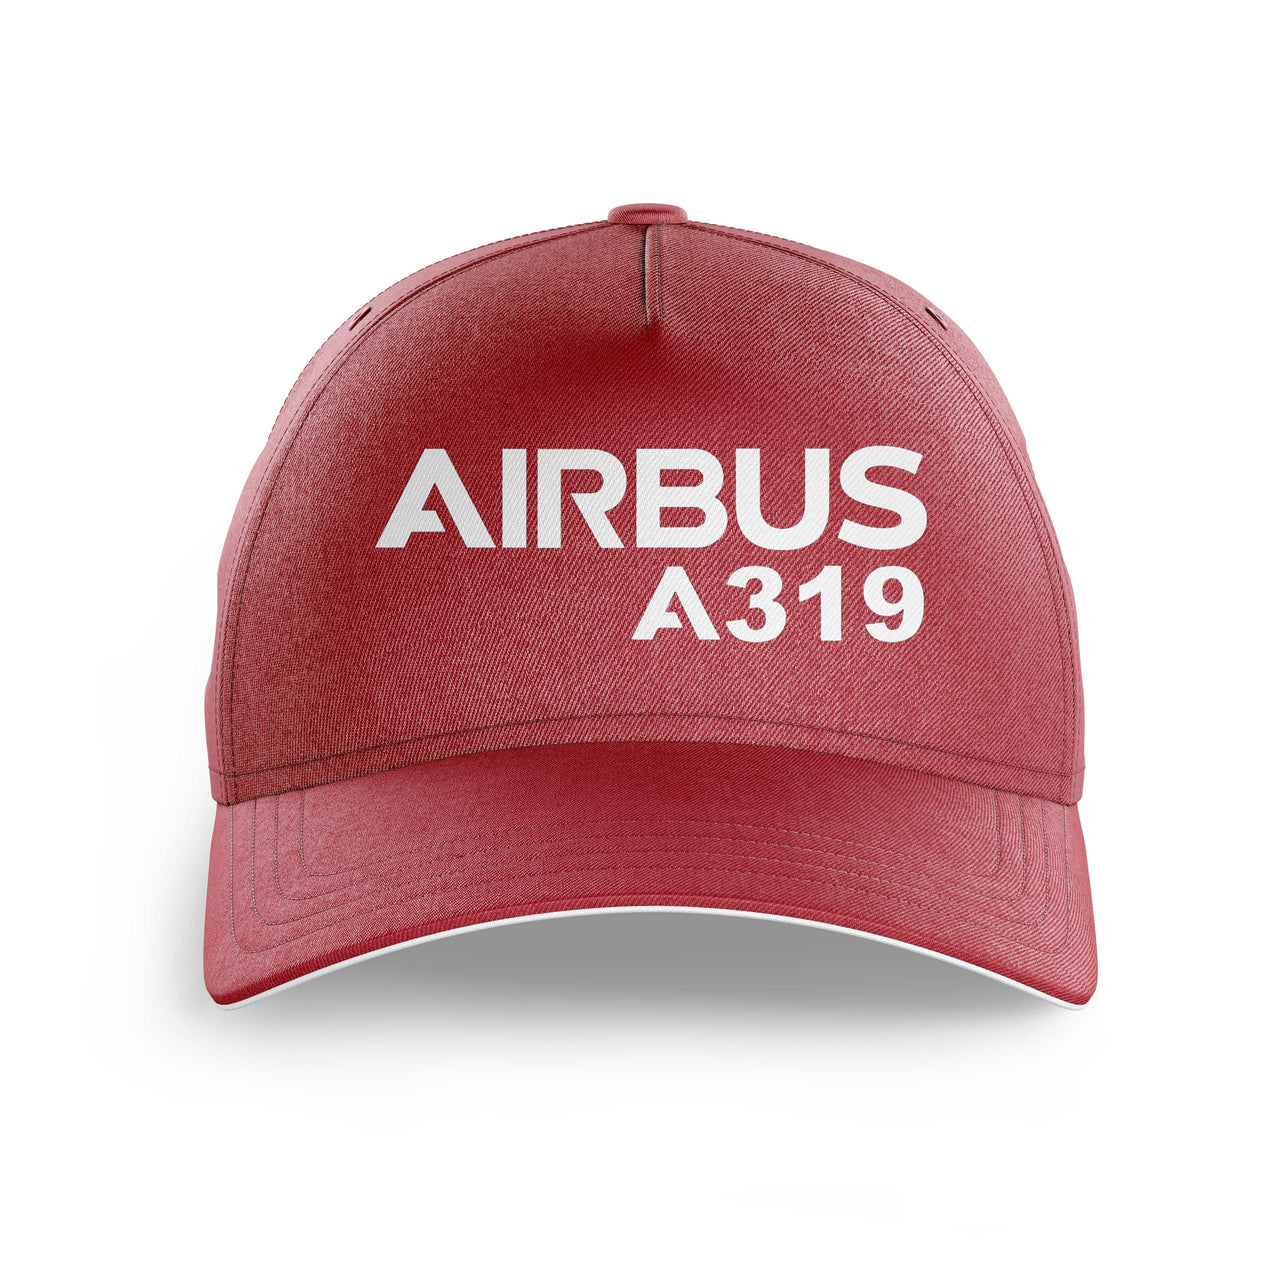 Airbus A319 & Text Printed Hats